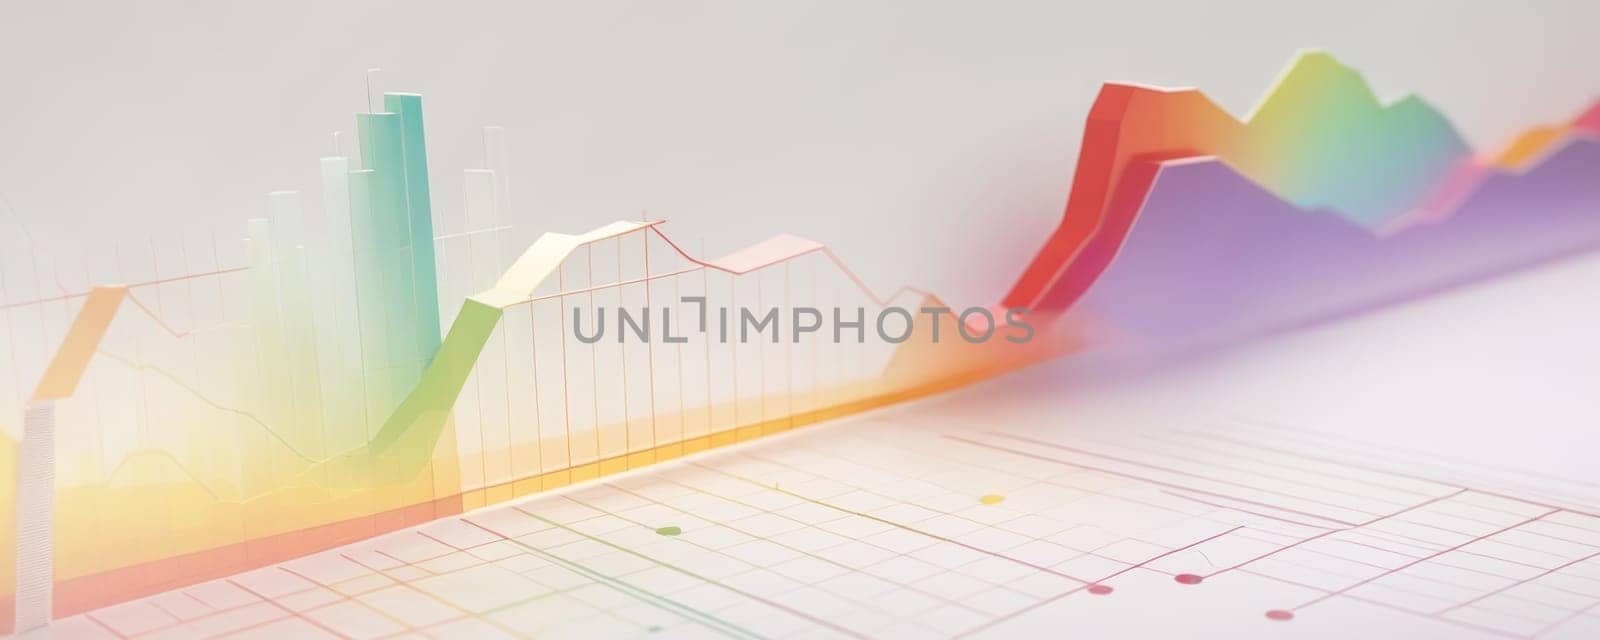 Colorful Abstract Representation of Financial Data by nkotlyar